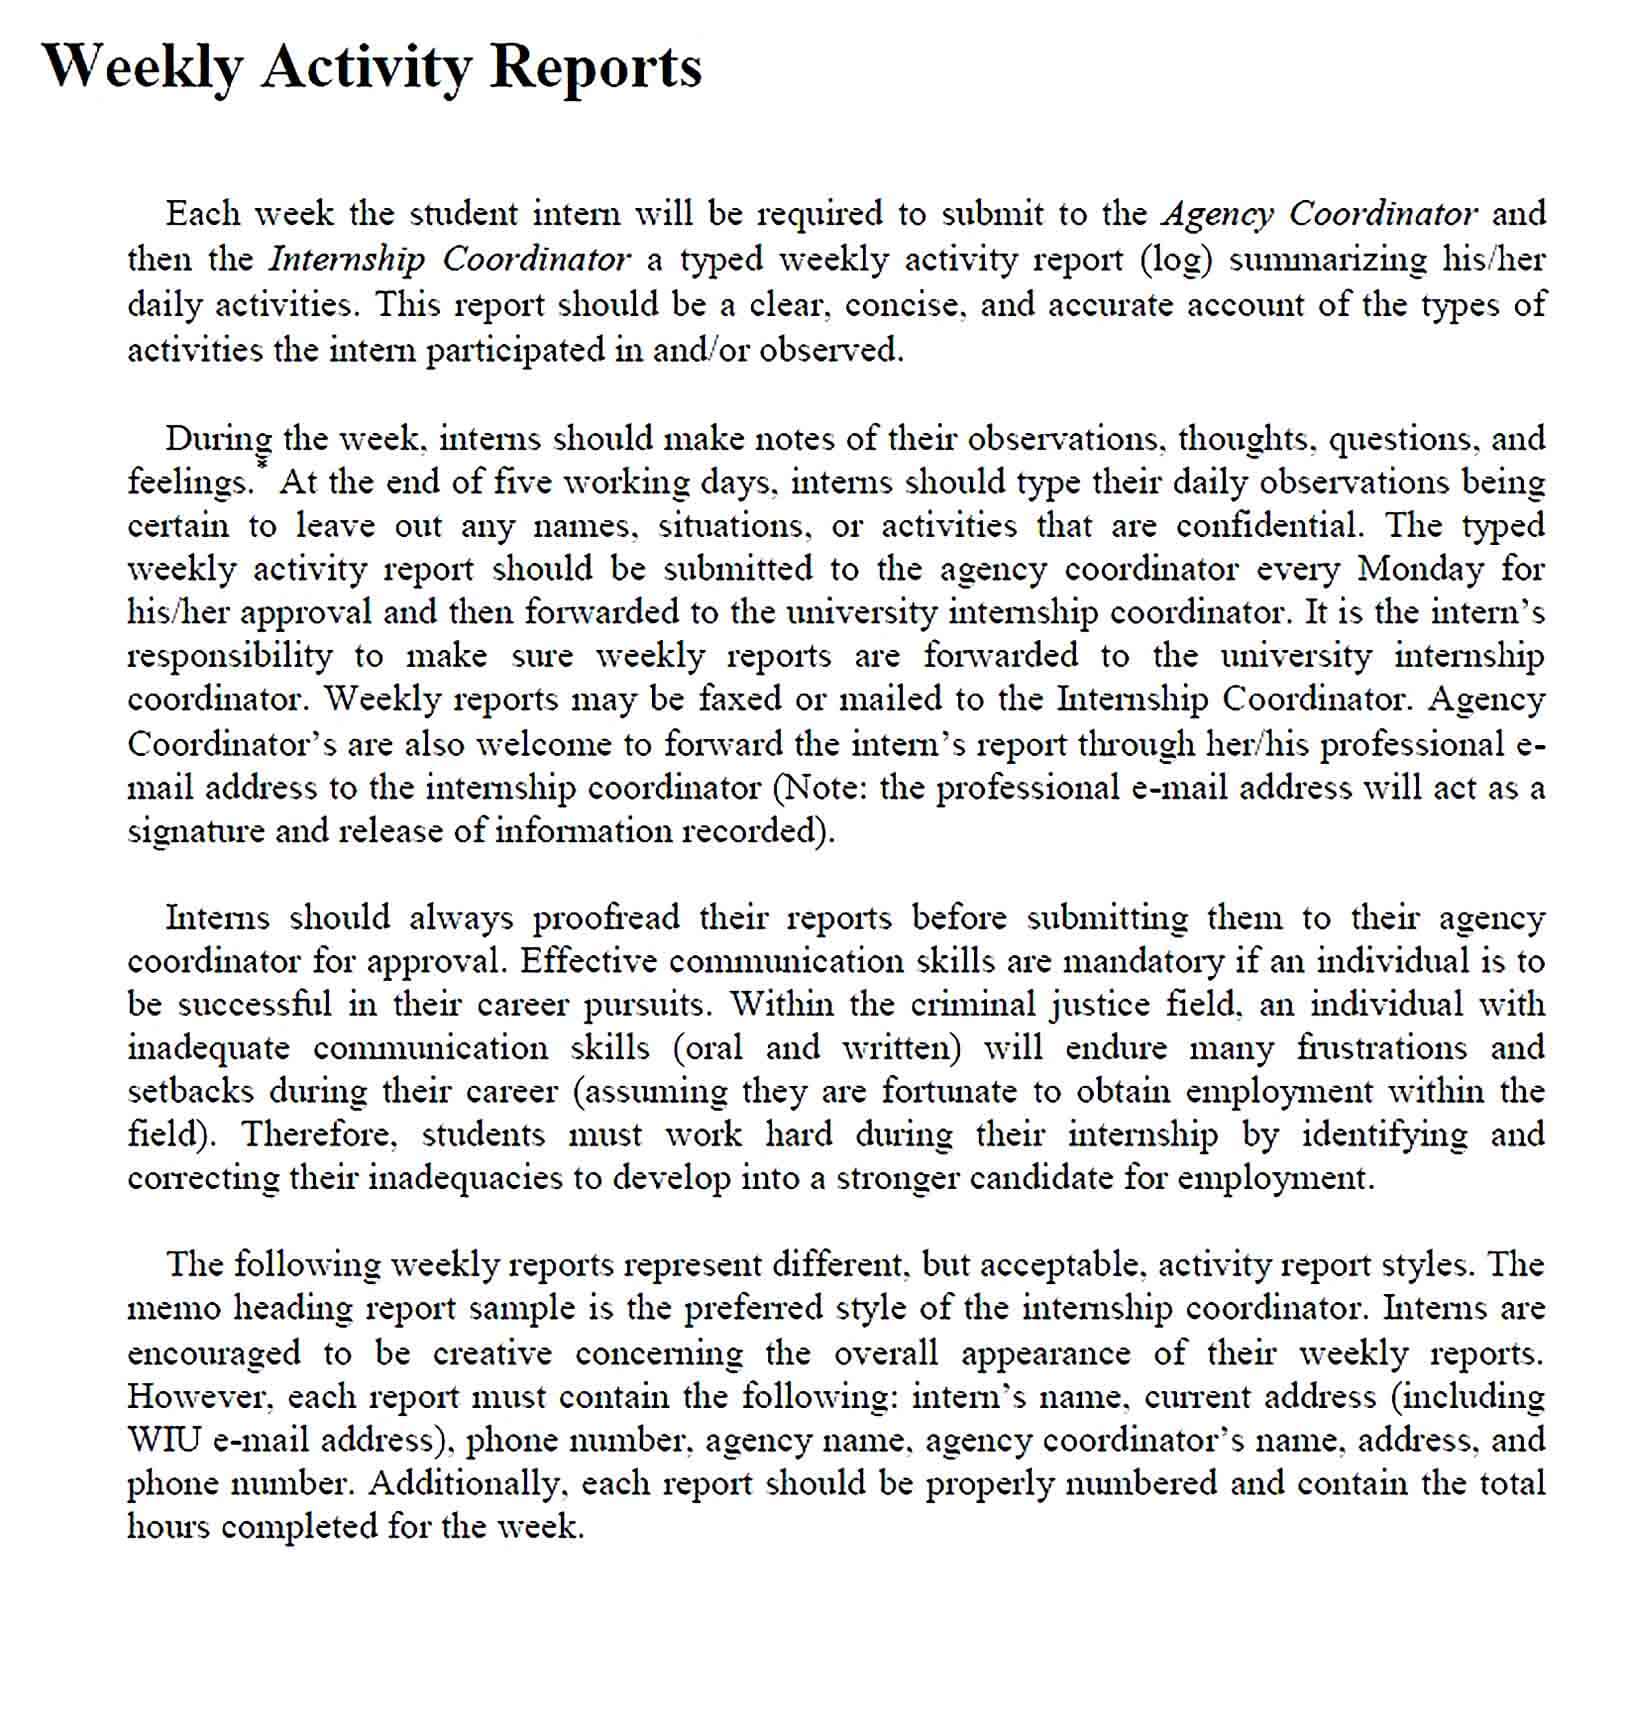 Sample Weekly Activity Report in PDF